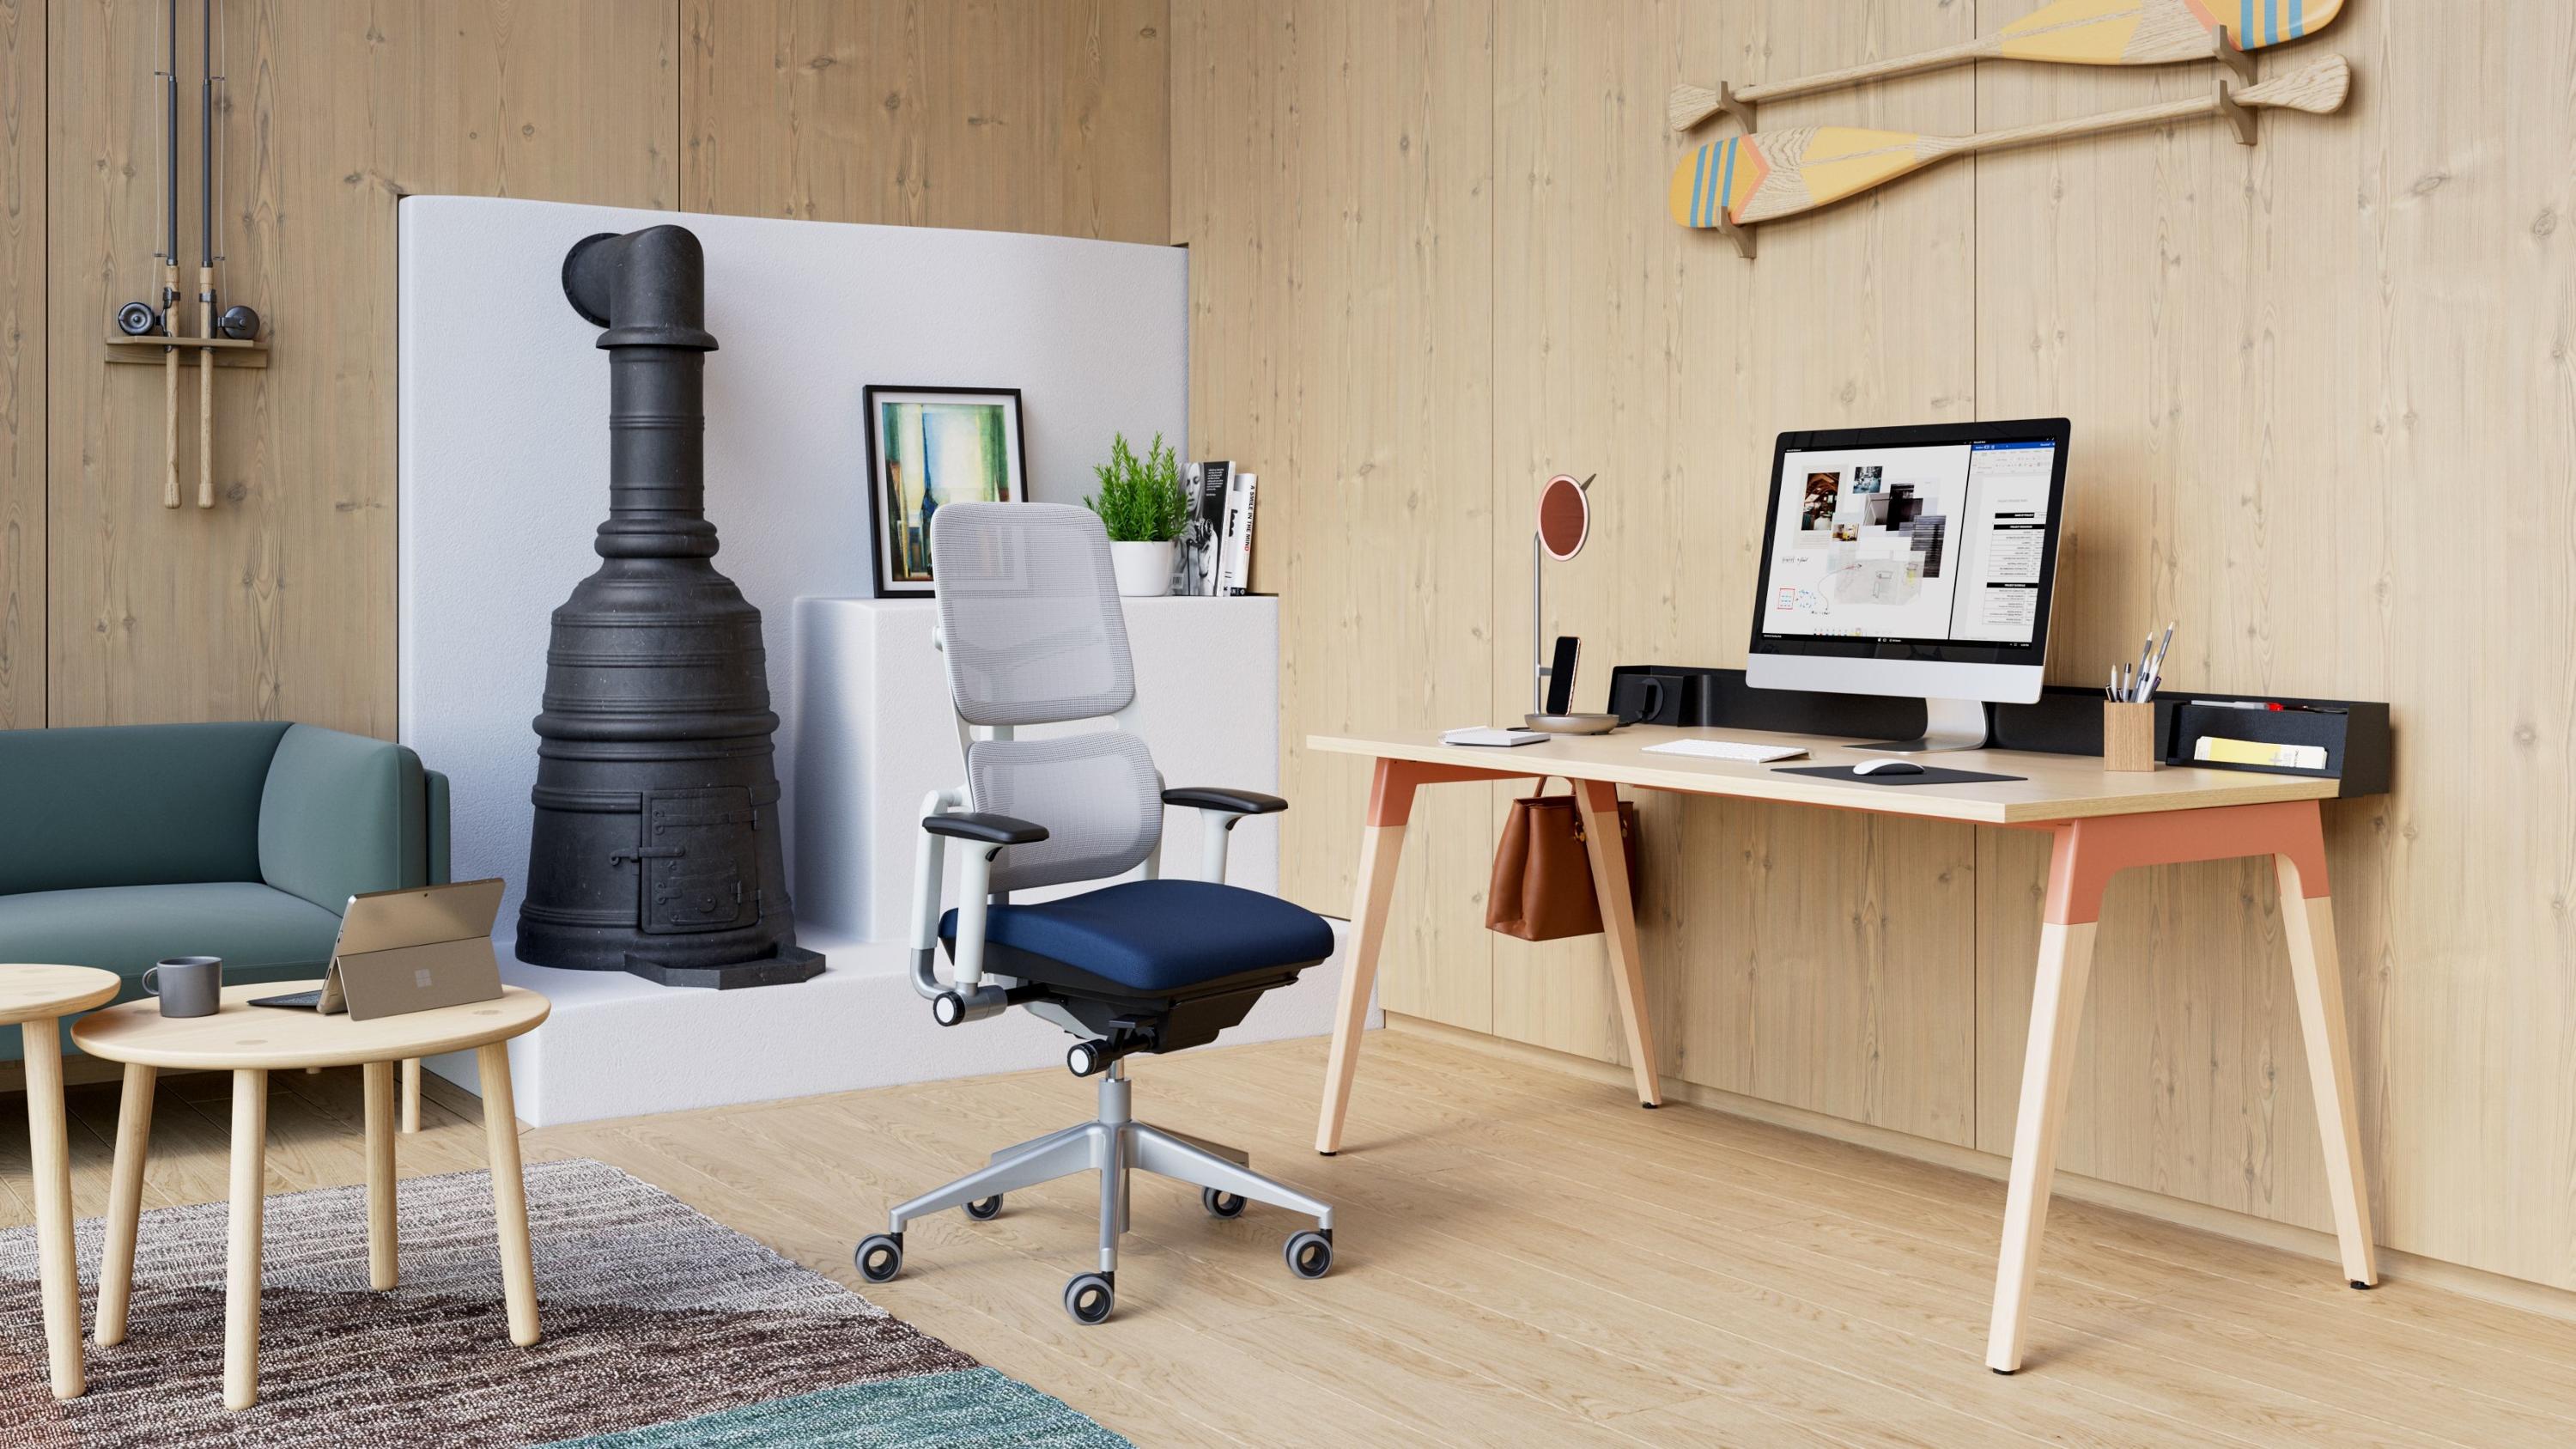 Transforming the office: the new Lares desk by Steelcase